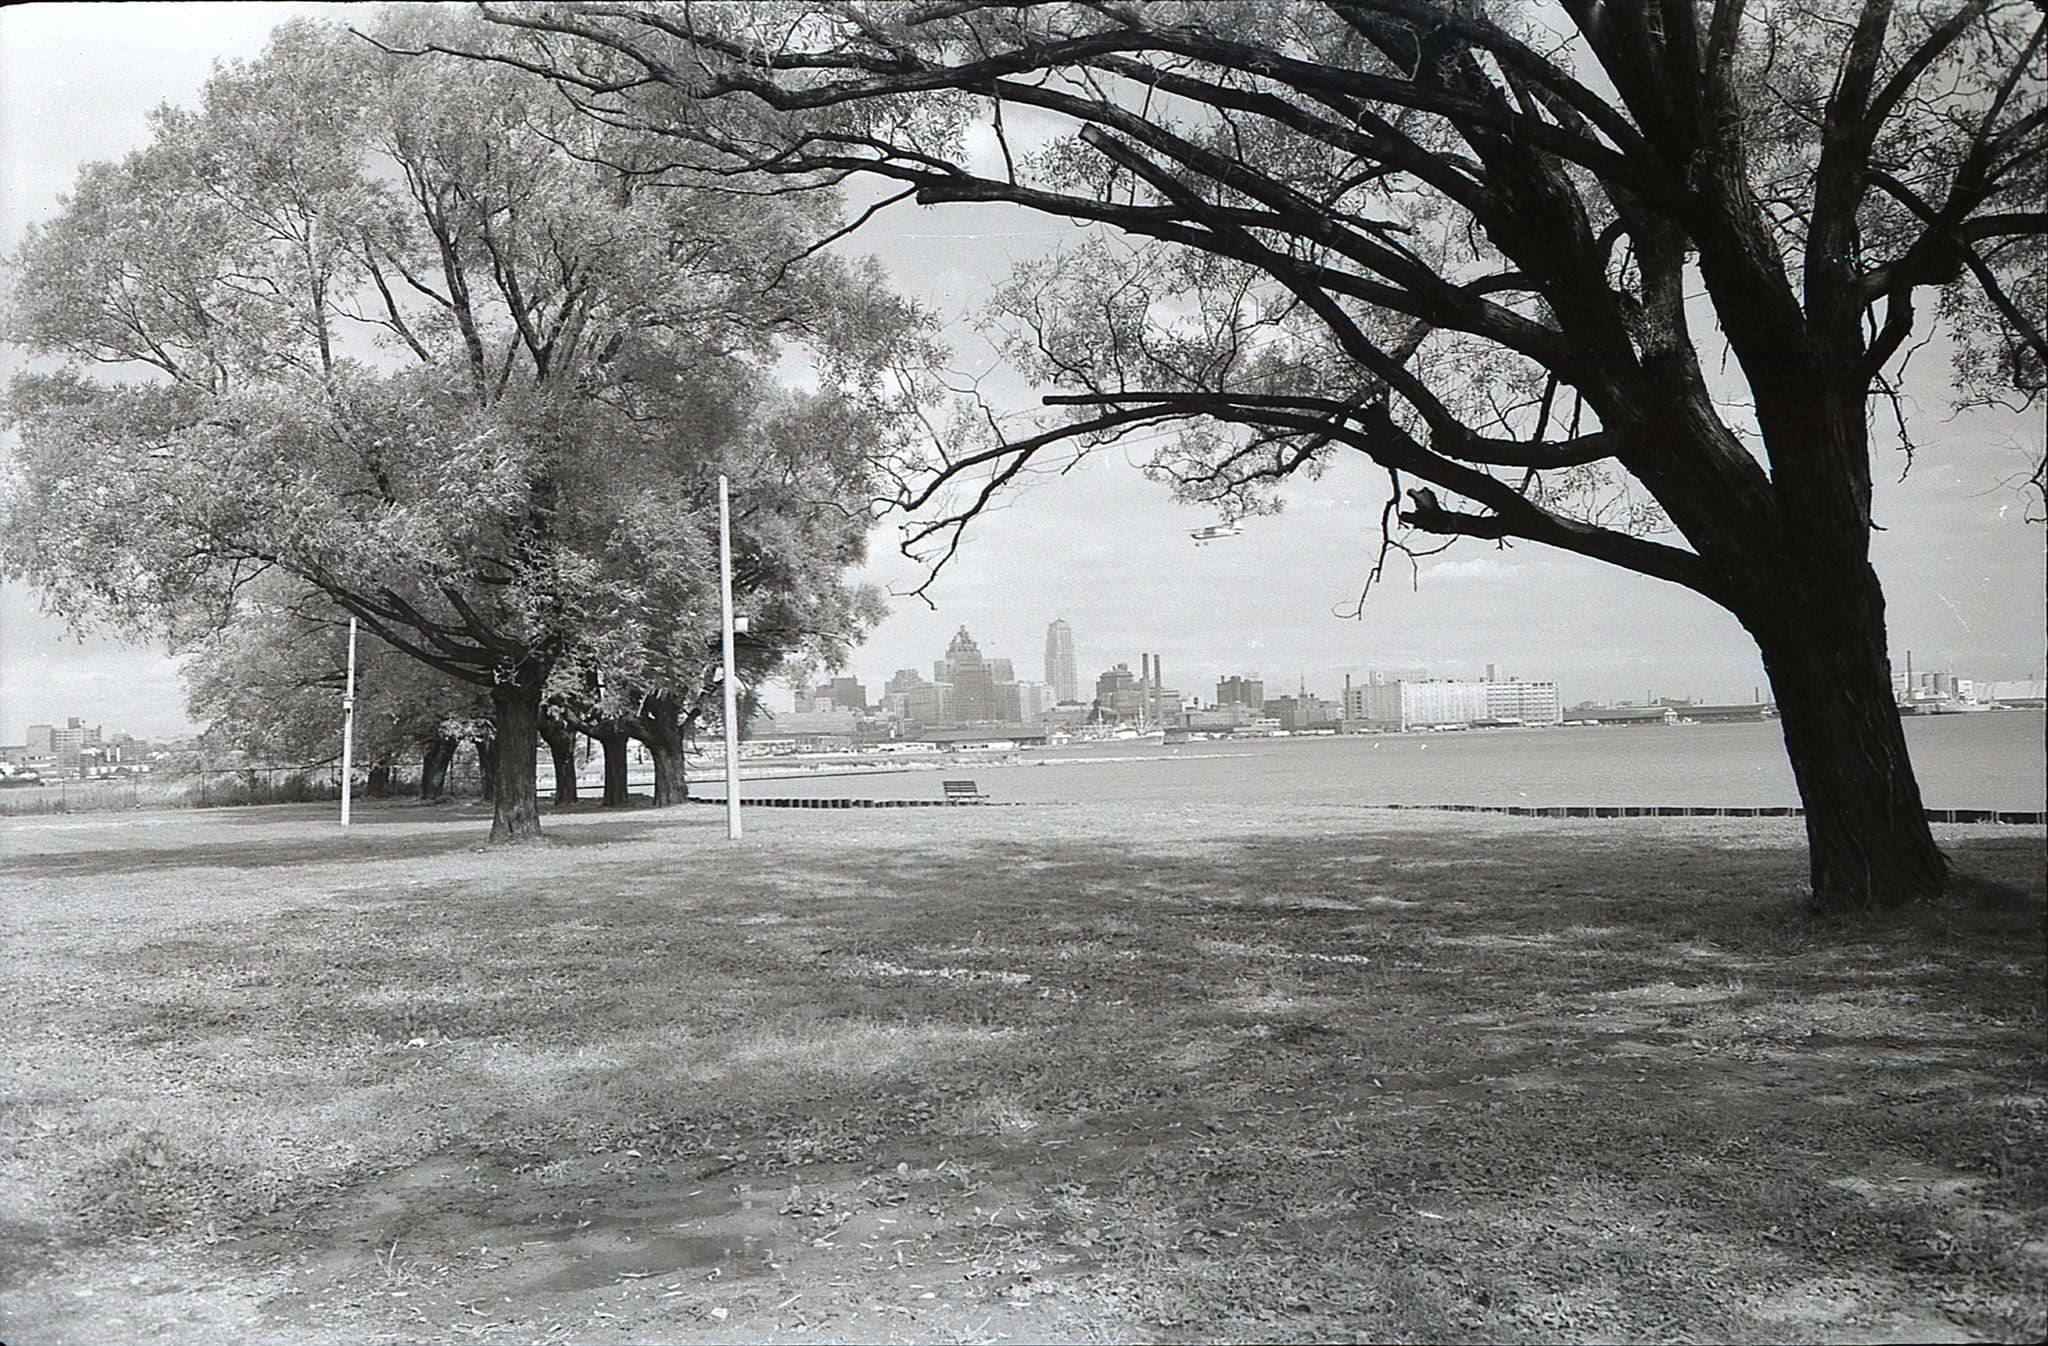 Another view from the Toronto Islands, 1960.